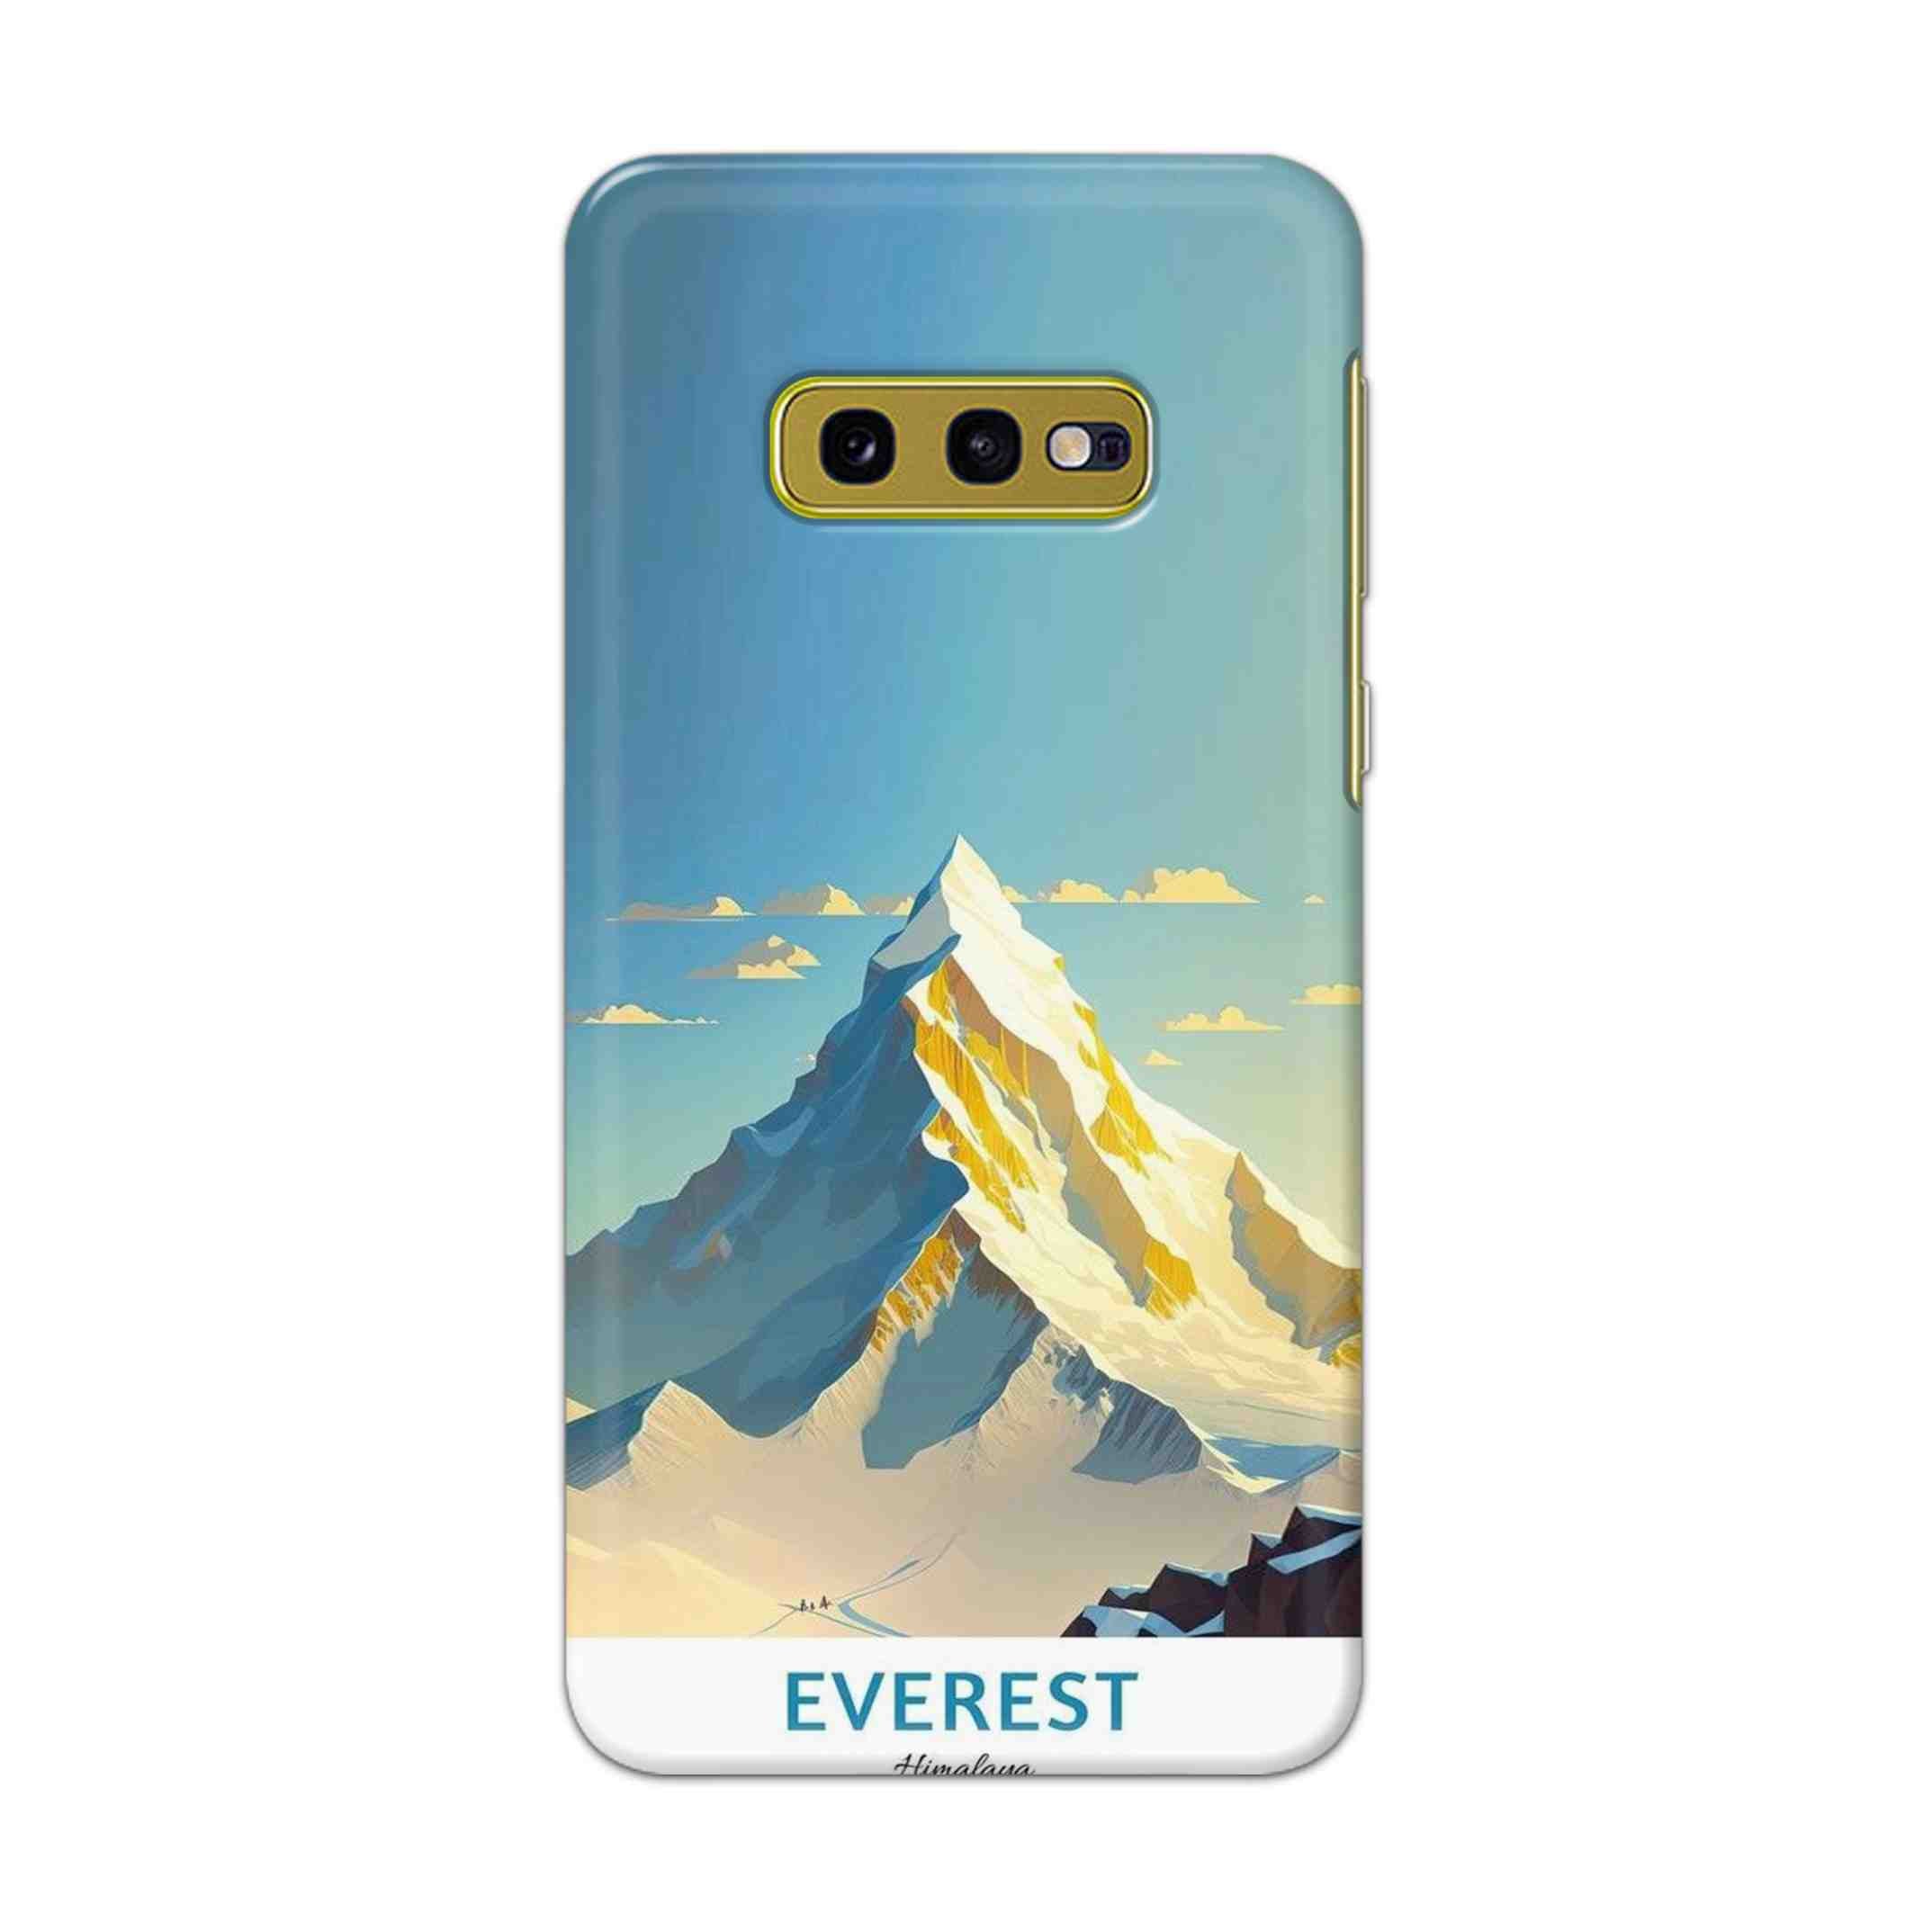 Buy Everest Hard Back Mobile Phone Case Cover For Samsung Galaxy S10e Online